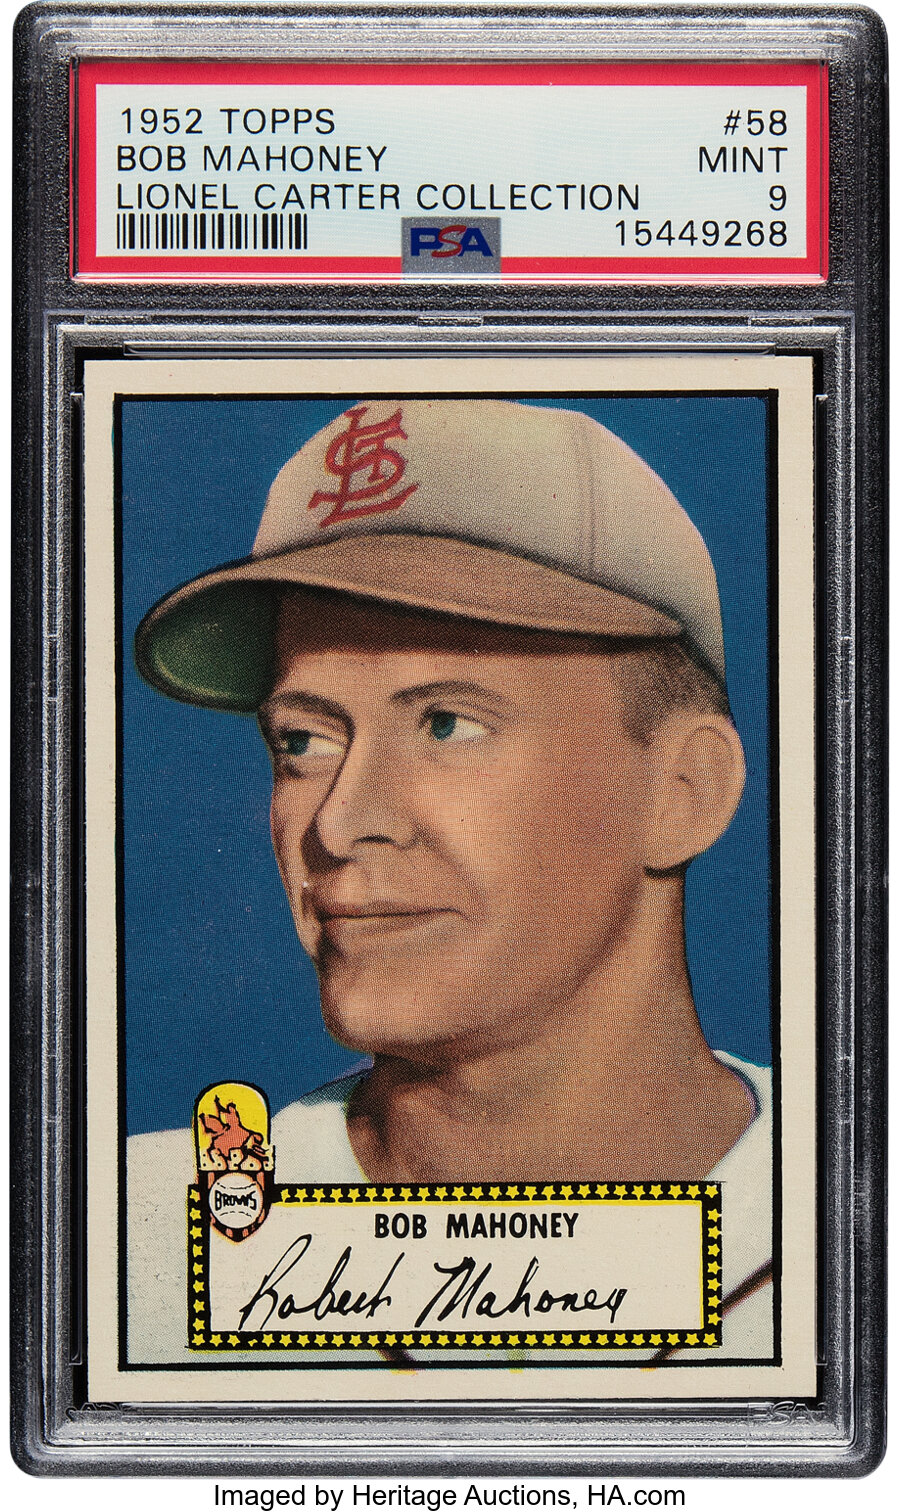 1952 Topps Bob Mahoney (Black Back) Rookie #58 PSA Mint 9 - Pop Four, None Superior! From the Lionel Carter Collection